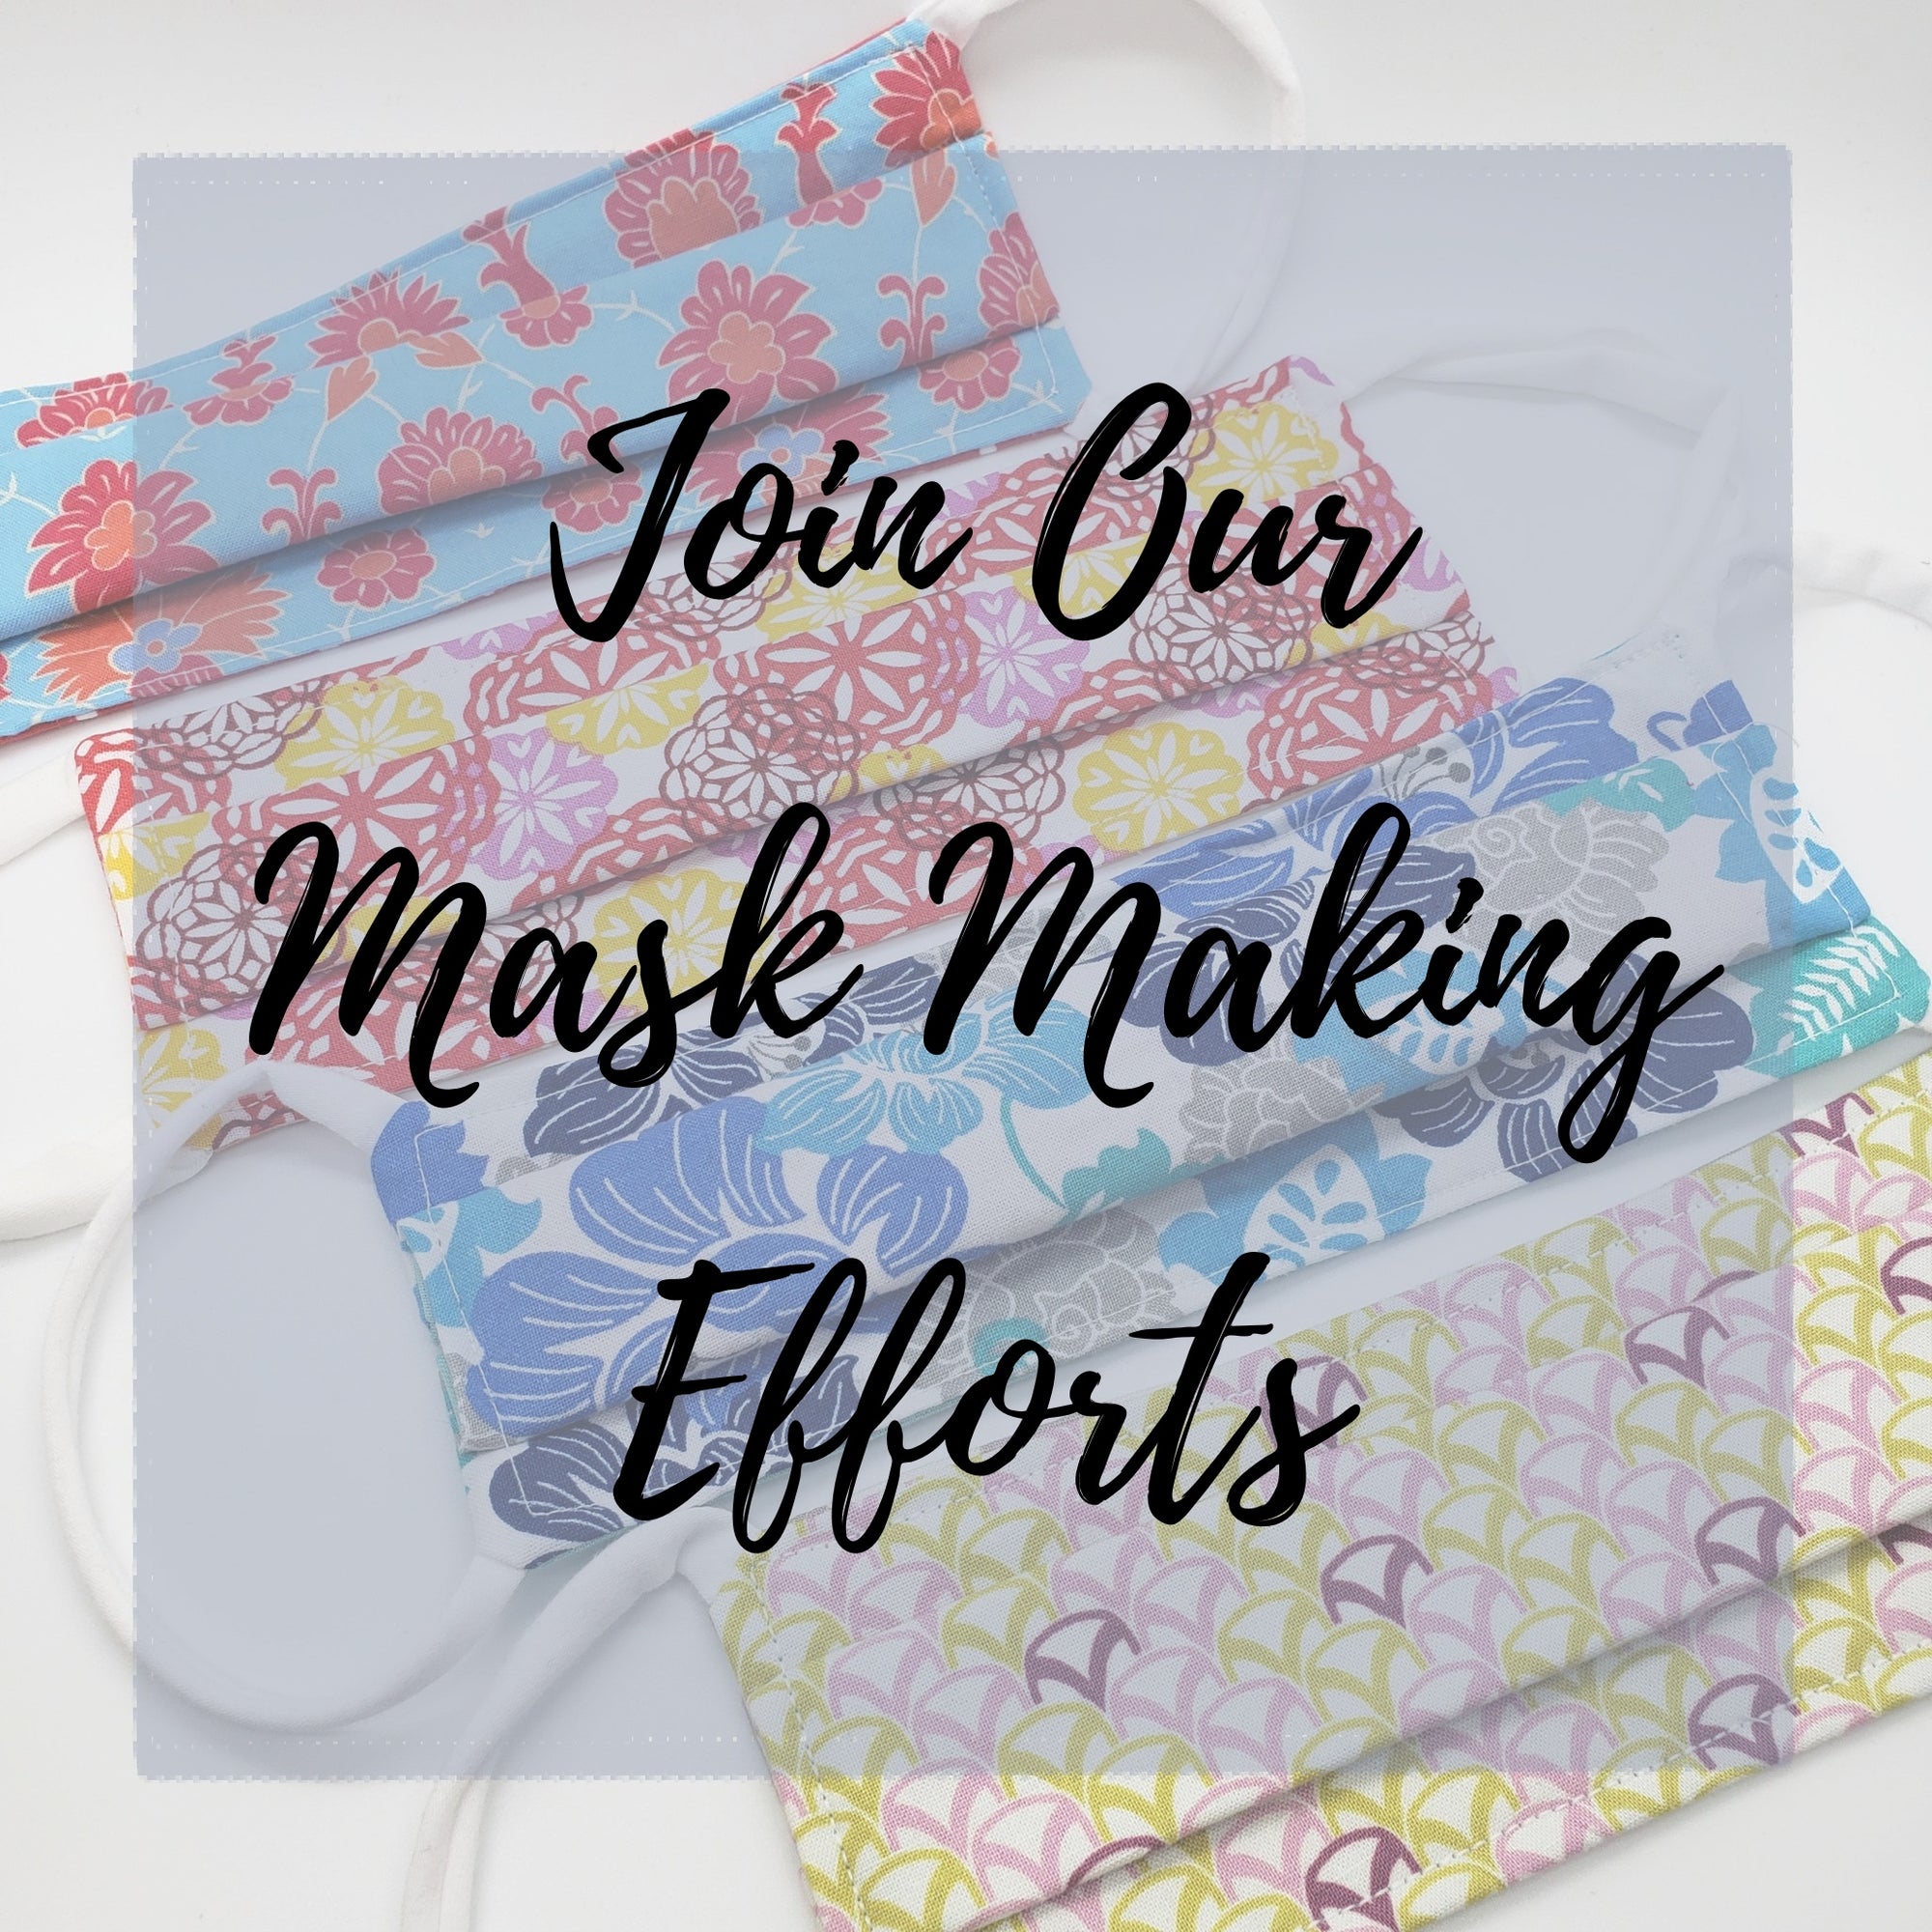 Join Our Mask Making Efforts